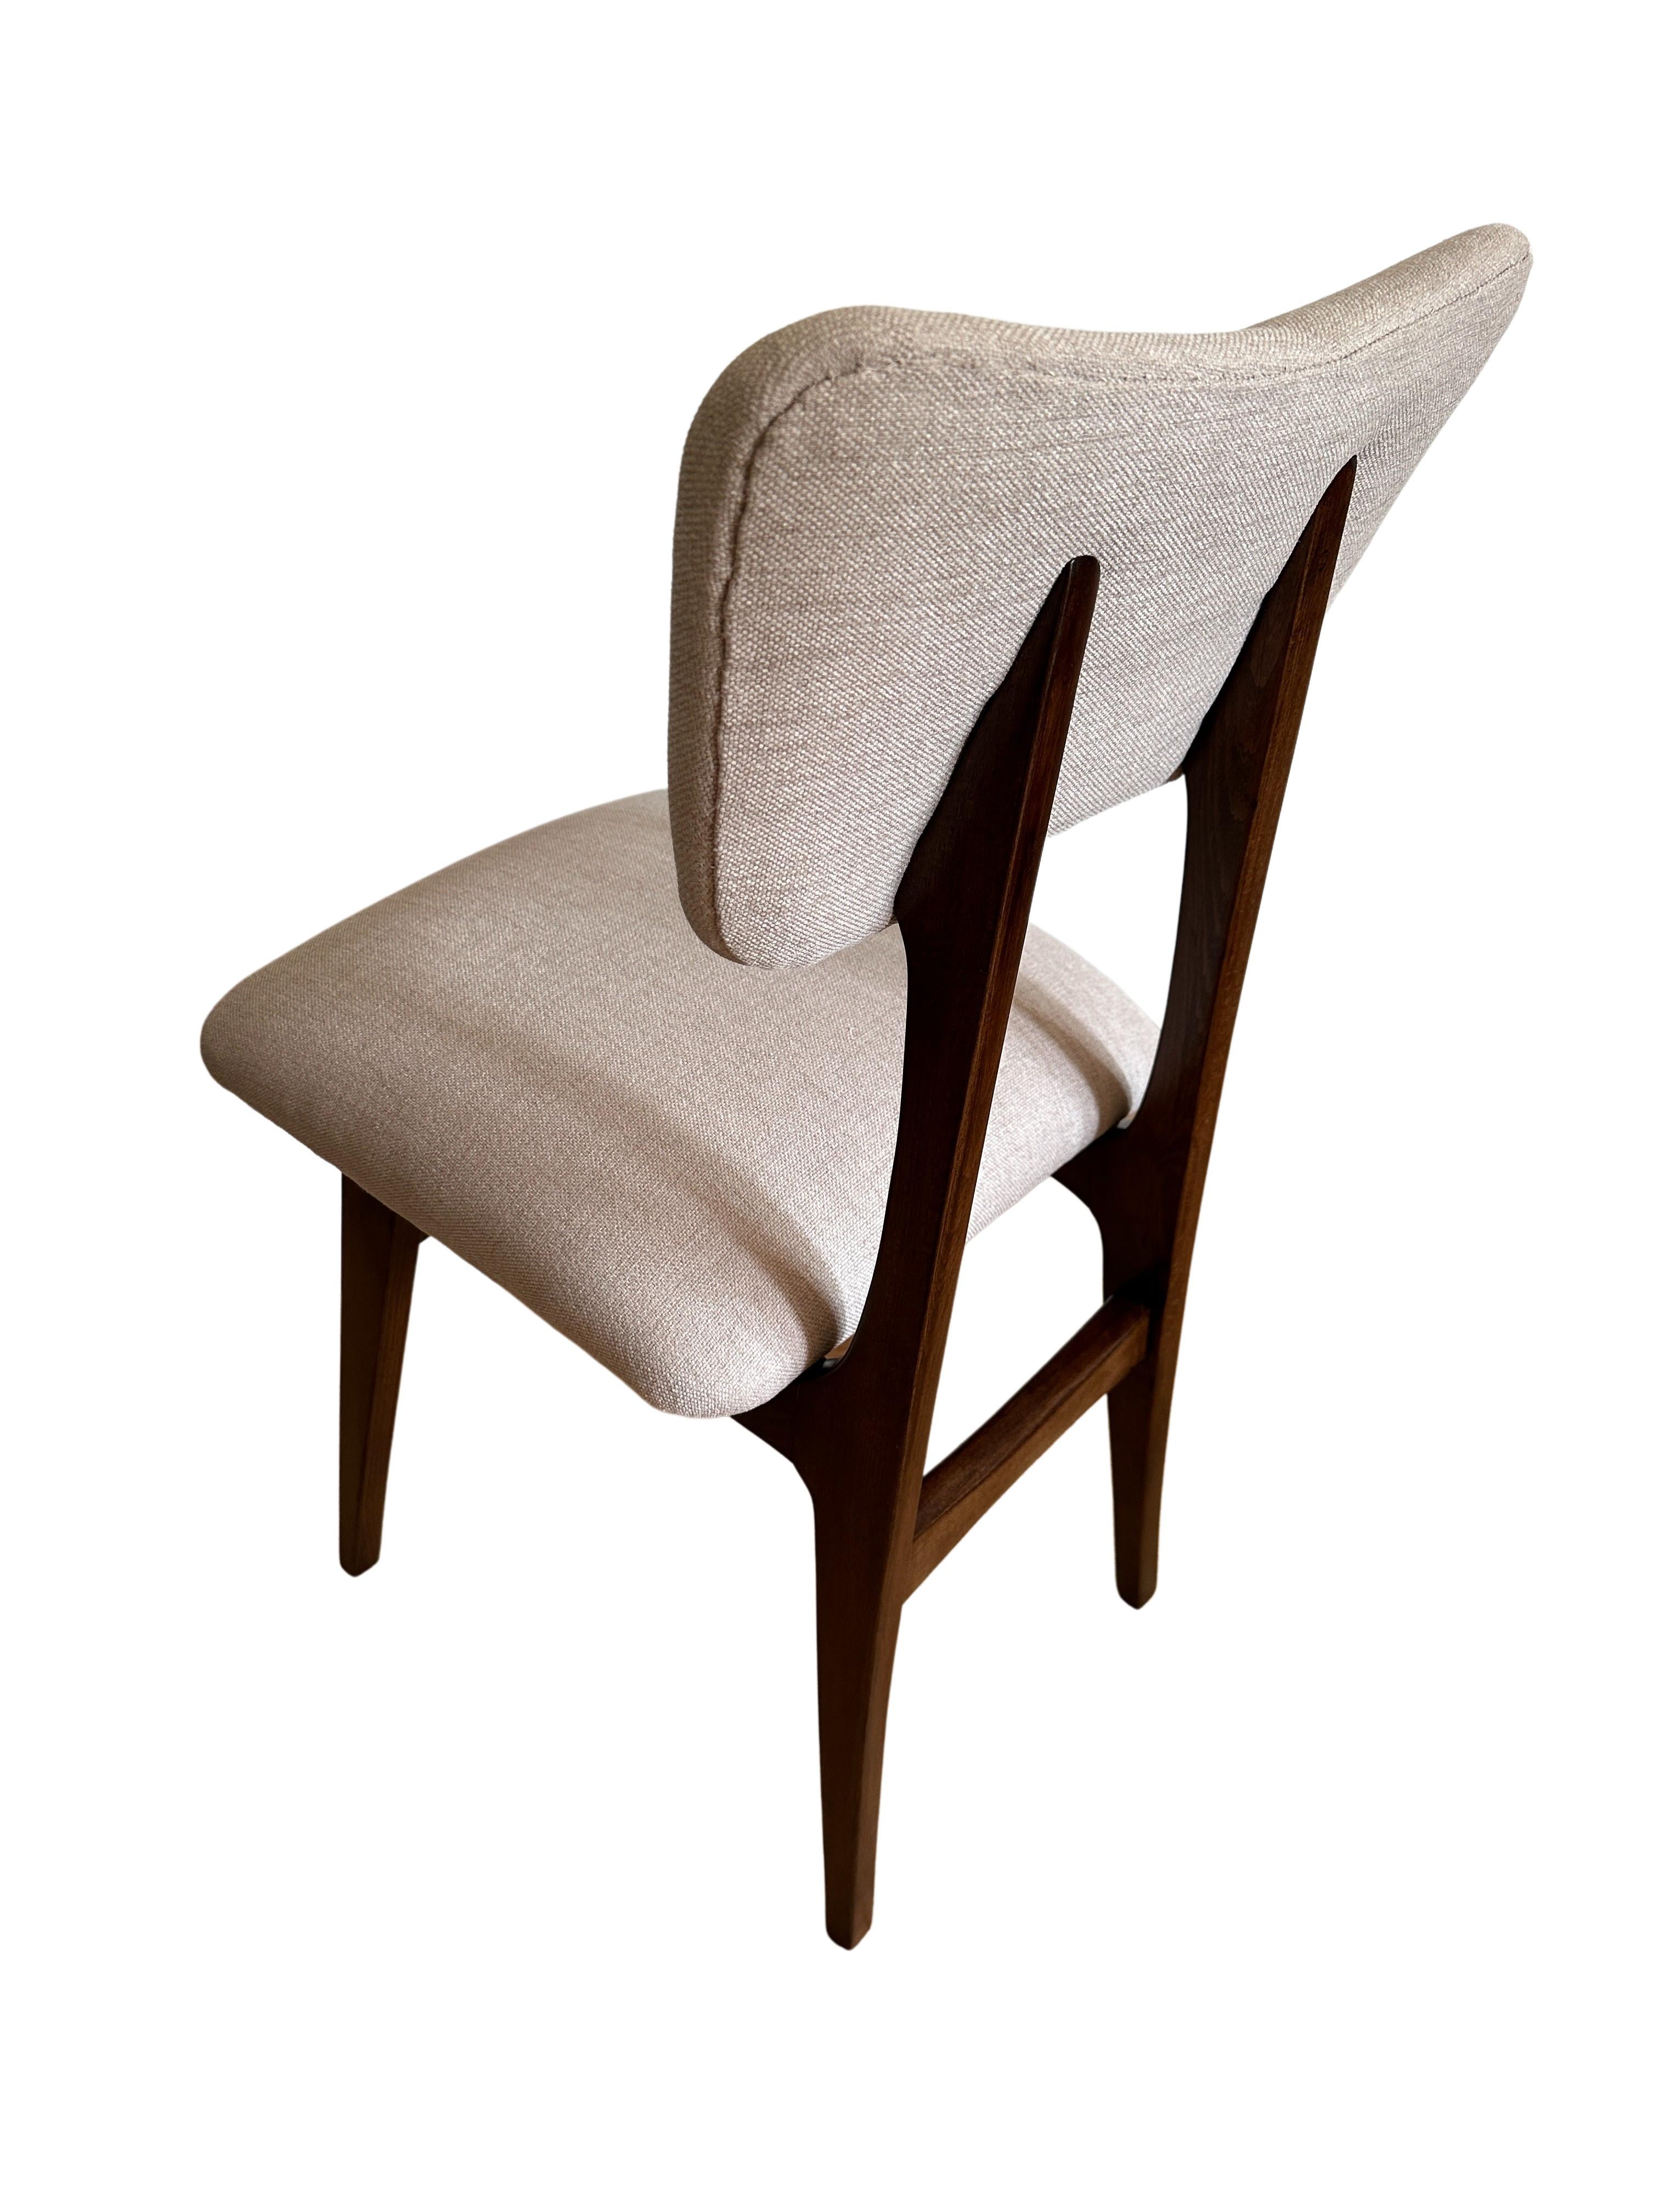 Bouclé Set of 6 Midcentury Beige and Grey Dining Chairs, Europe, 1960s For Sale